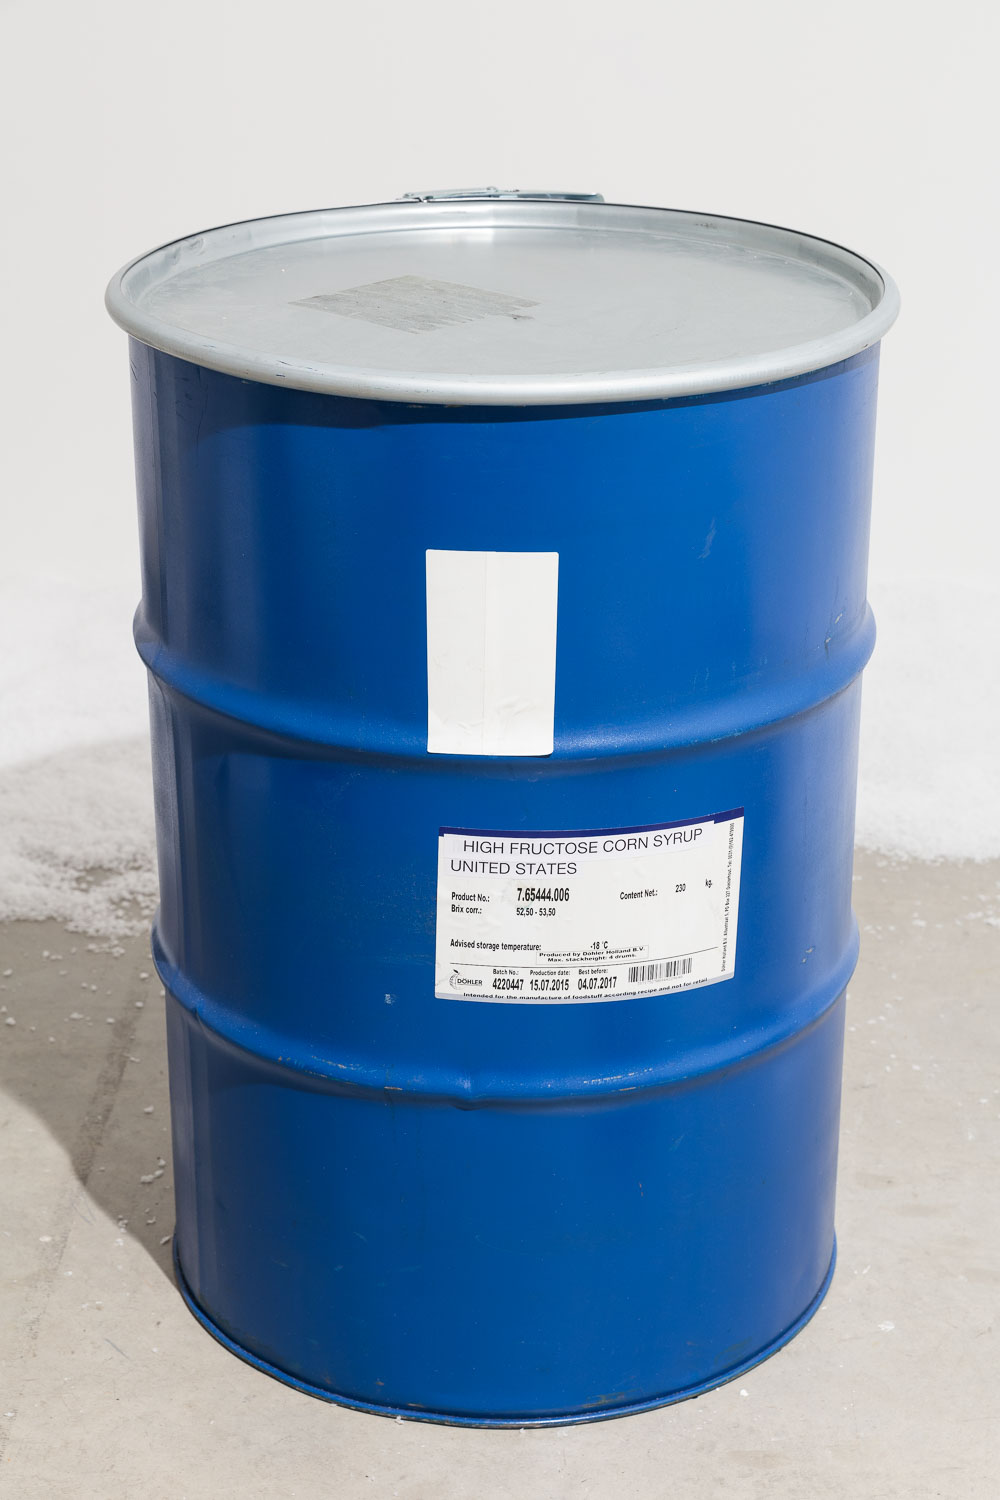 High Fructose Corn Syrup Barrel (Blue), 2015, metal drum, 60 x 86 cm, 23 5/8 x 15 3/5 ins. Puppies Puppies